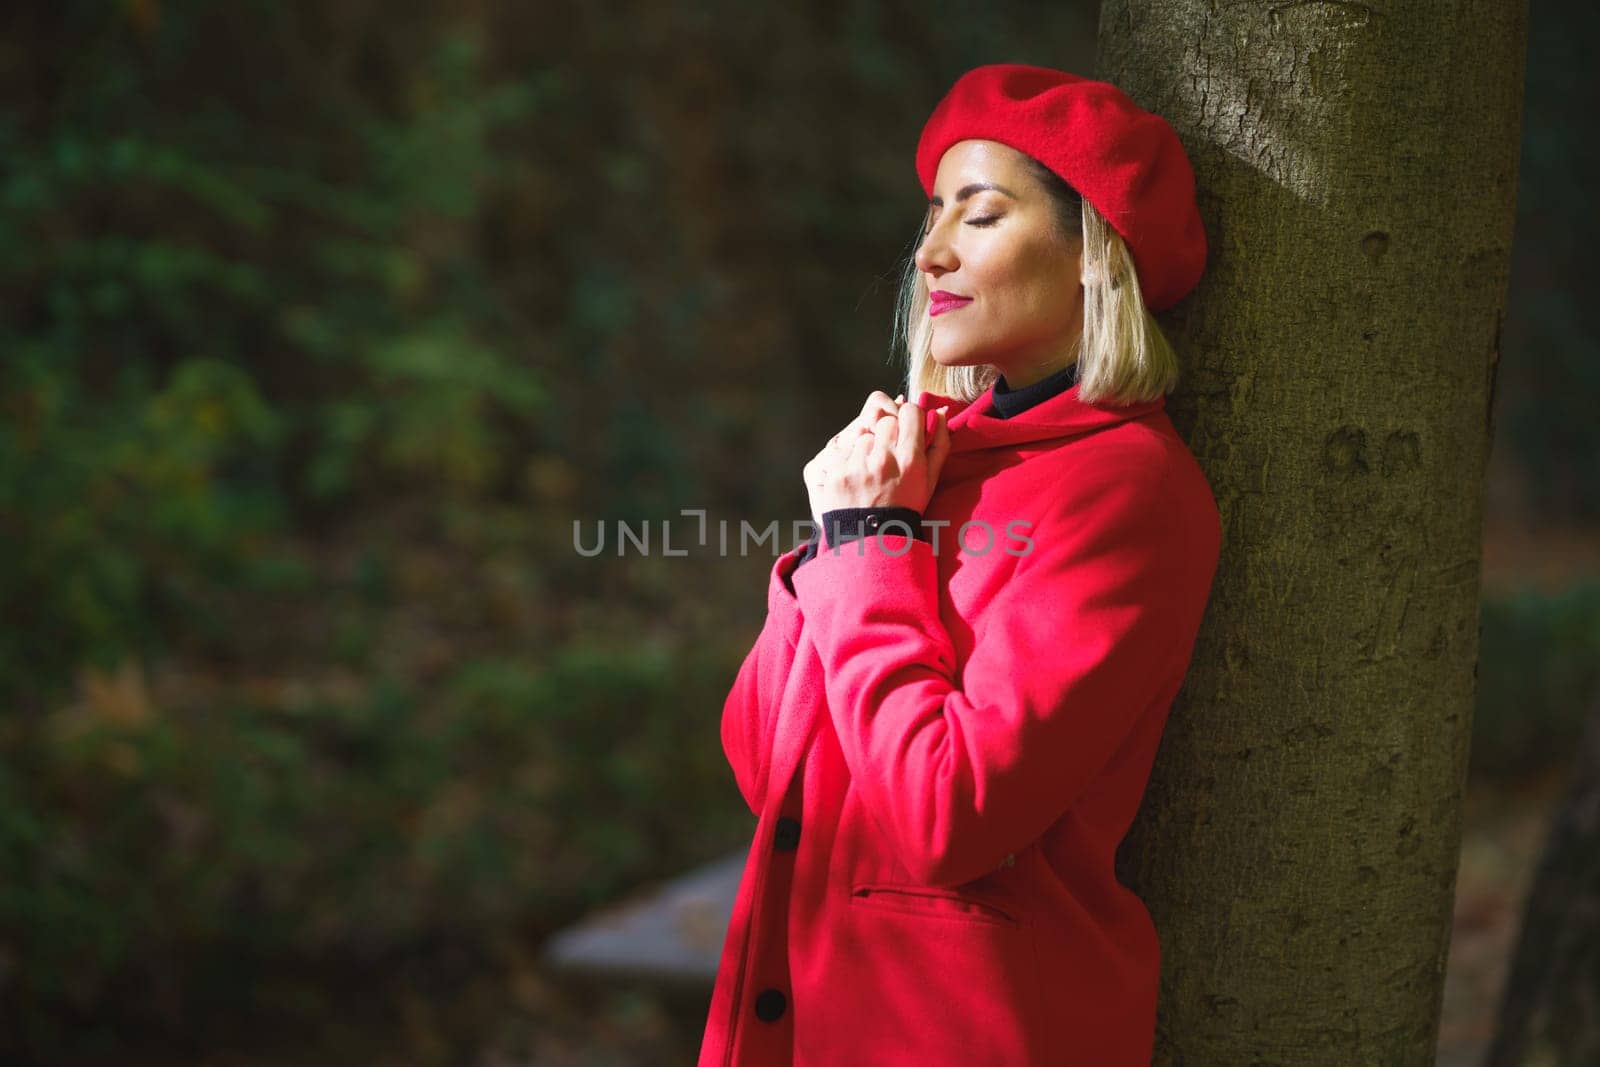 Side view of serene female with closed eyes adjusting collar of red coat while standing in sunlight near tree in park